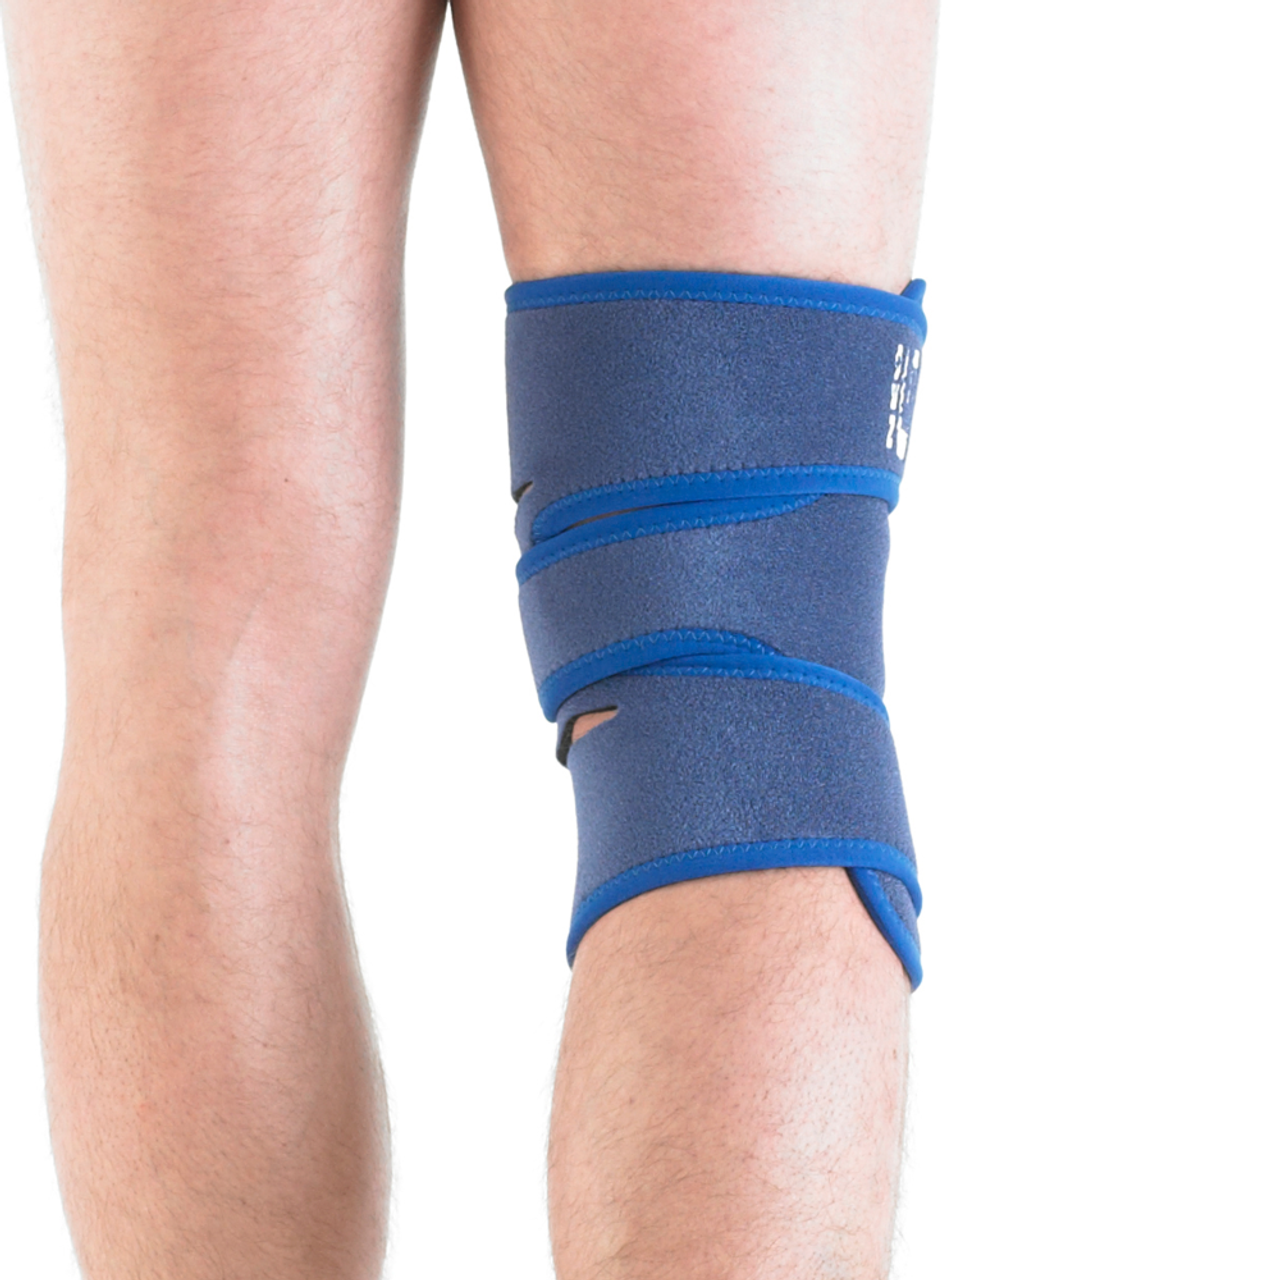  Neo-G Knee Support, Open Patella – Knee Support for